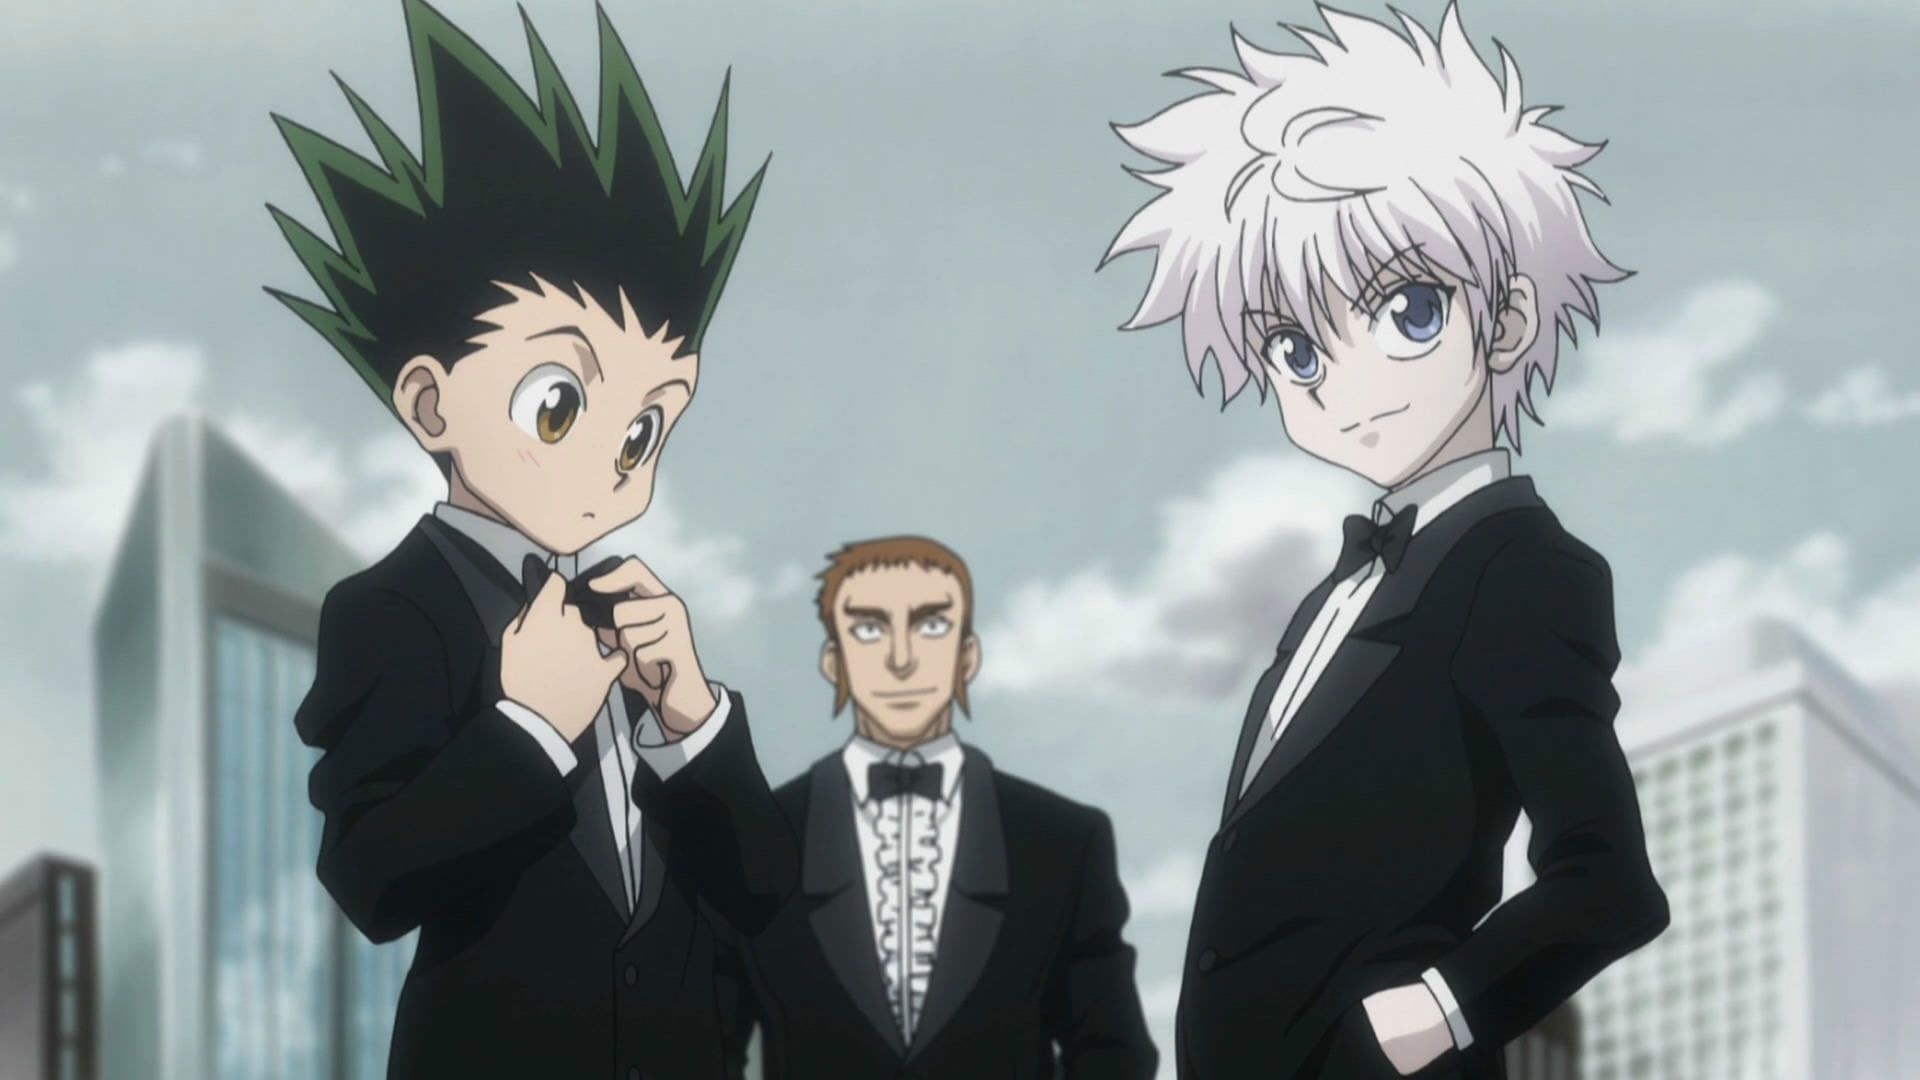 Gon and Killua: Hunter X Hunter, Anime, Zepile, An antiques trader who helps raise funds for the Southernpiece Auction. 1920x1080 Full HD Wallpaper.